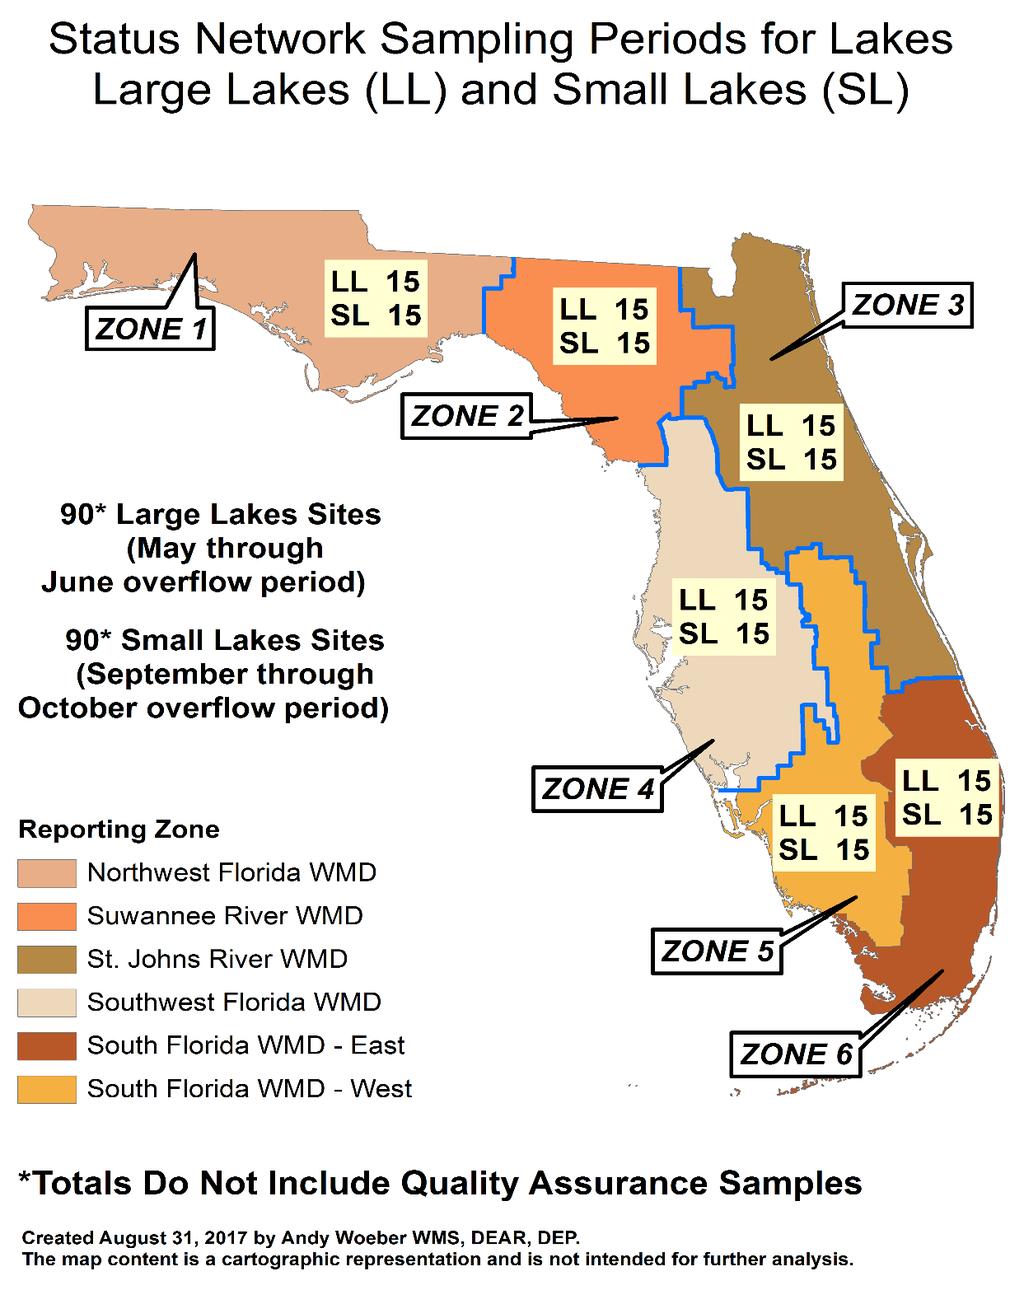 LARGE LAKES Mar Apr May June Office Recon Field Recon SMALL LAKES Sampling July